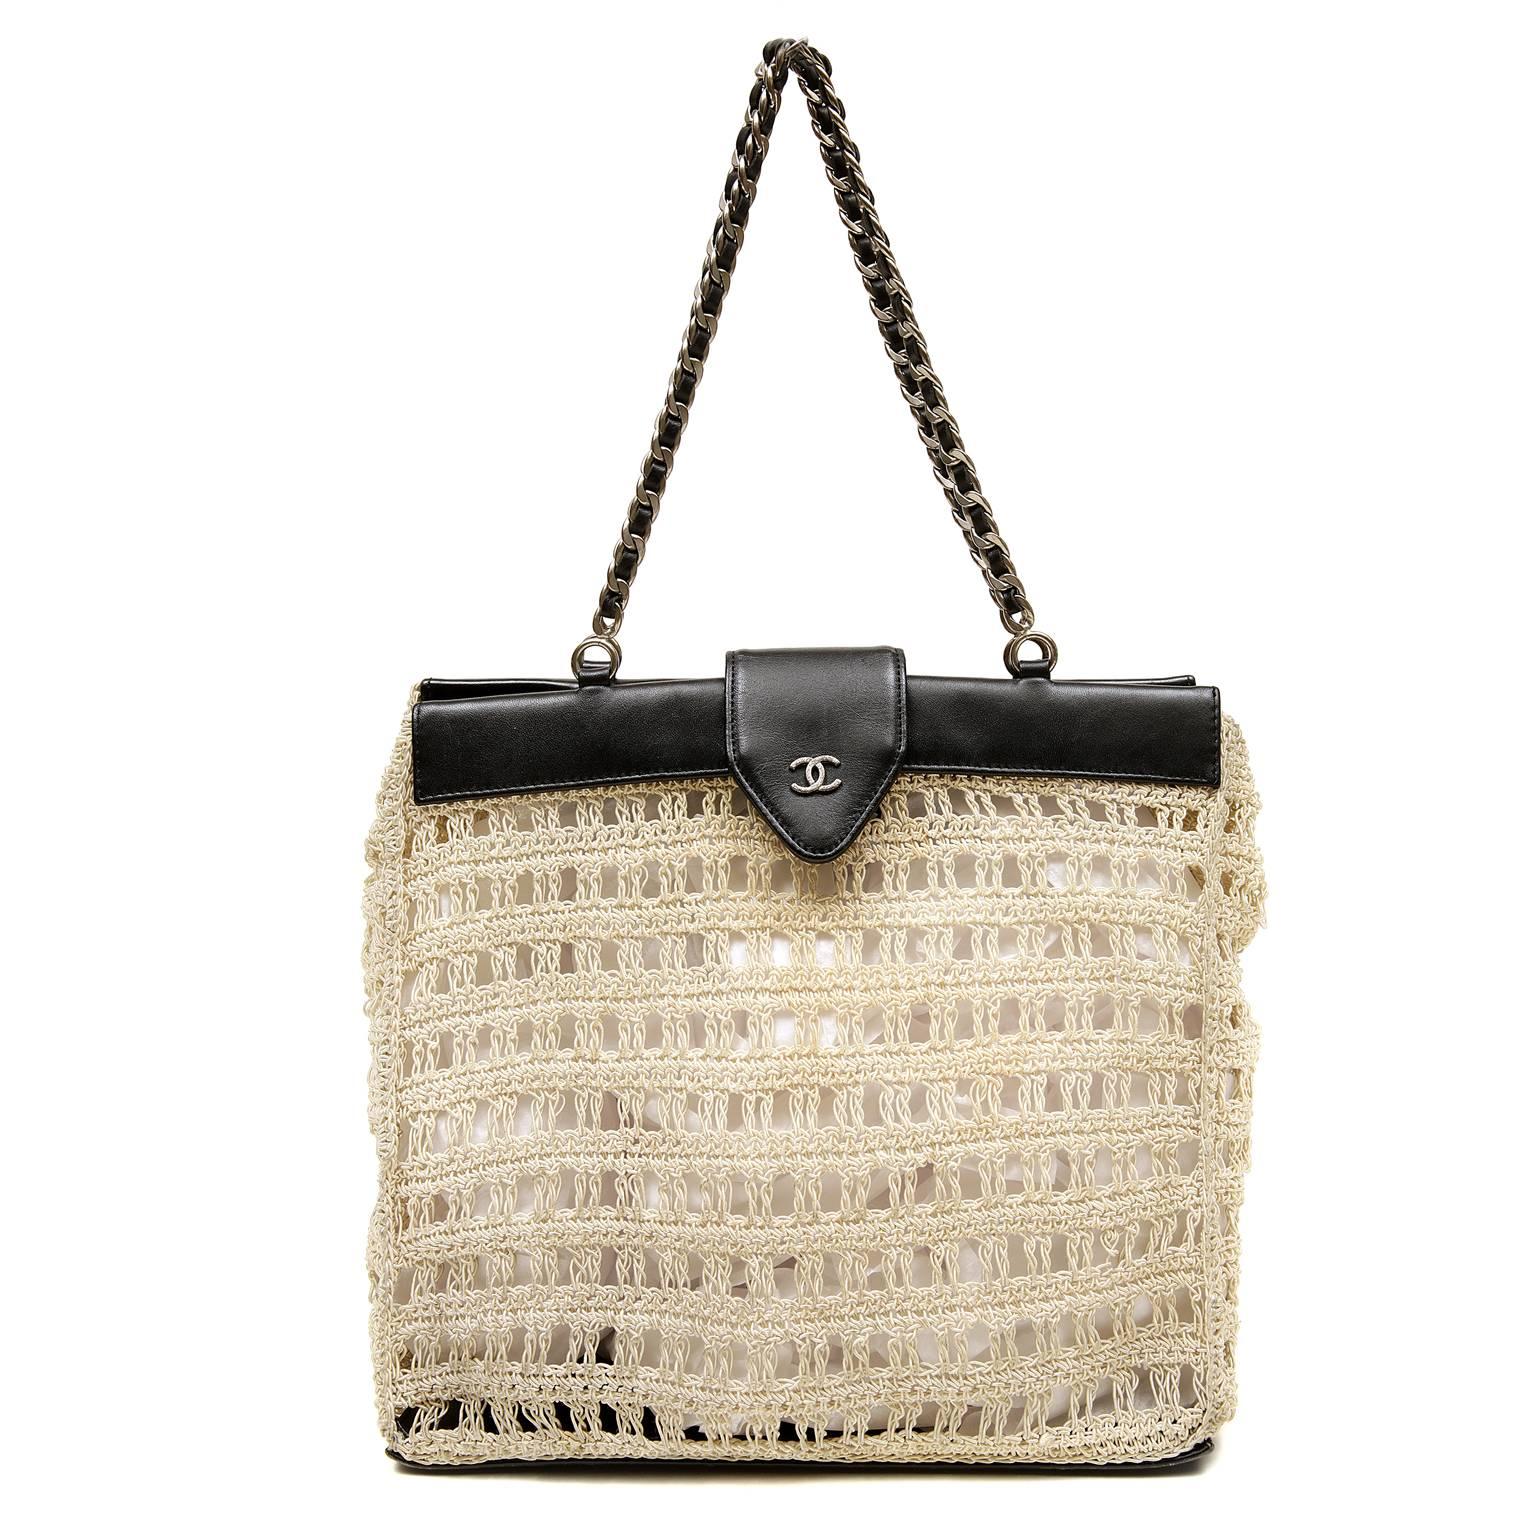 Chanel Beige Crocheted and Black Leather Tote Bag For Sale